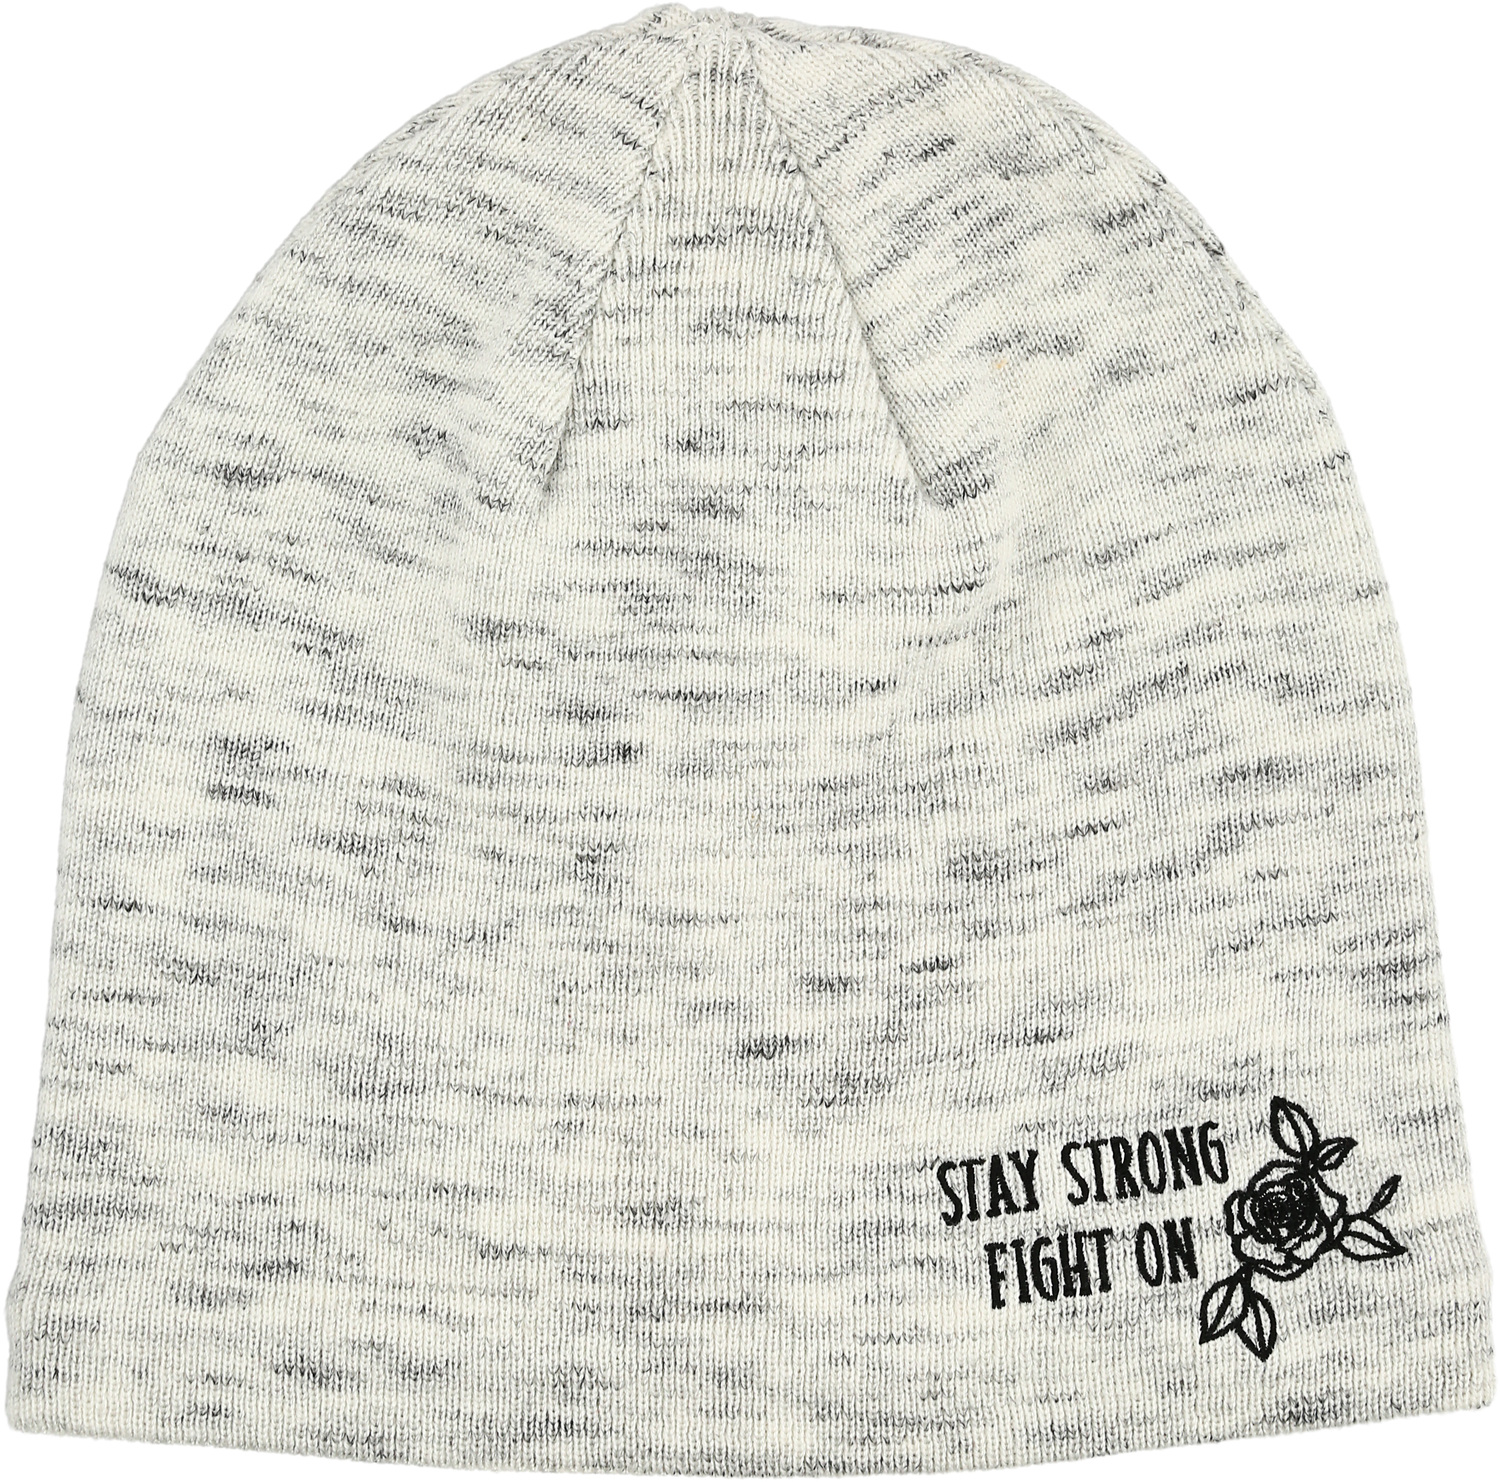 Stay Strong by Faith Hope and Healing - Stay Strong - Women's Soft Cotton Lined Knitted Beanie